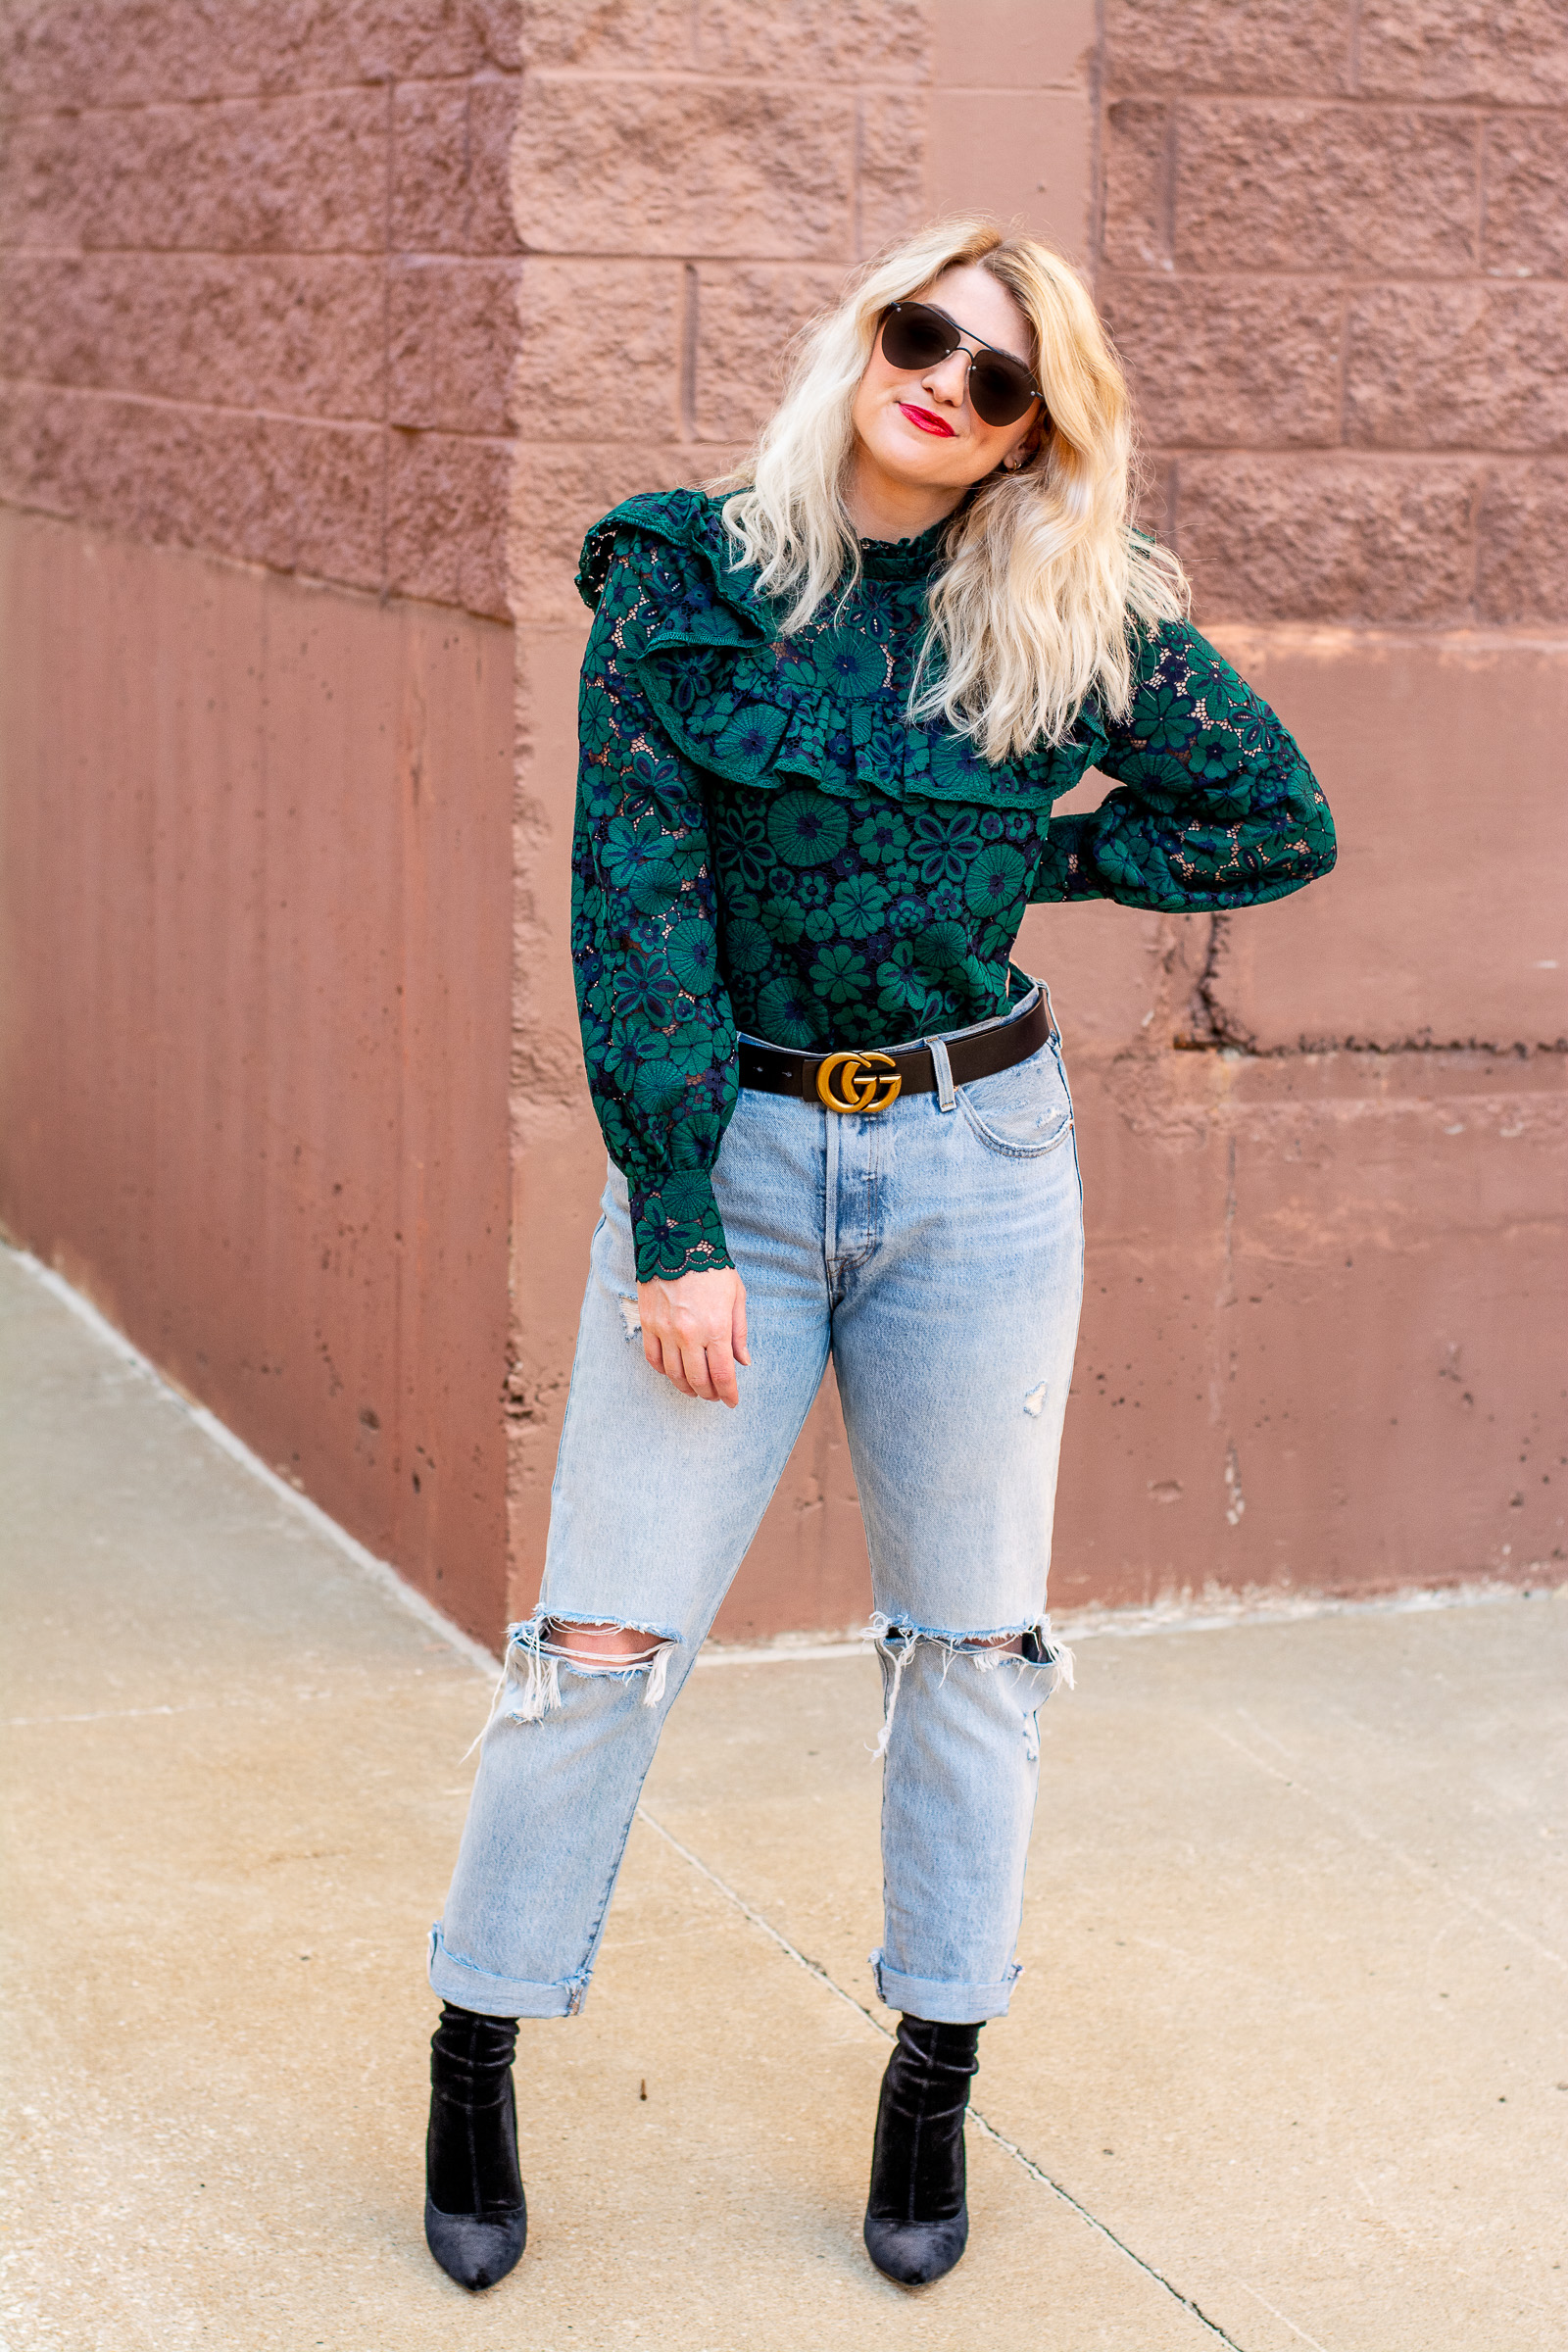 Sock Boots with a Green Lace Blouse + Levi's. | Le Stylo Rouge